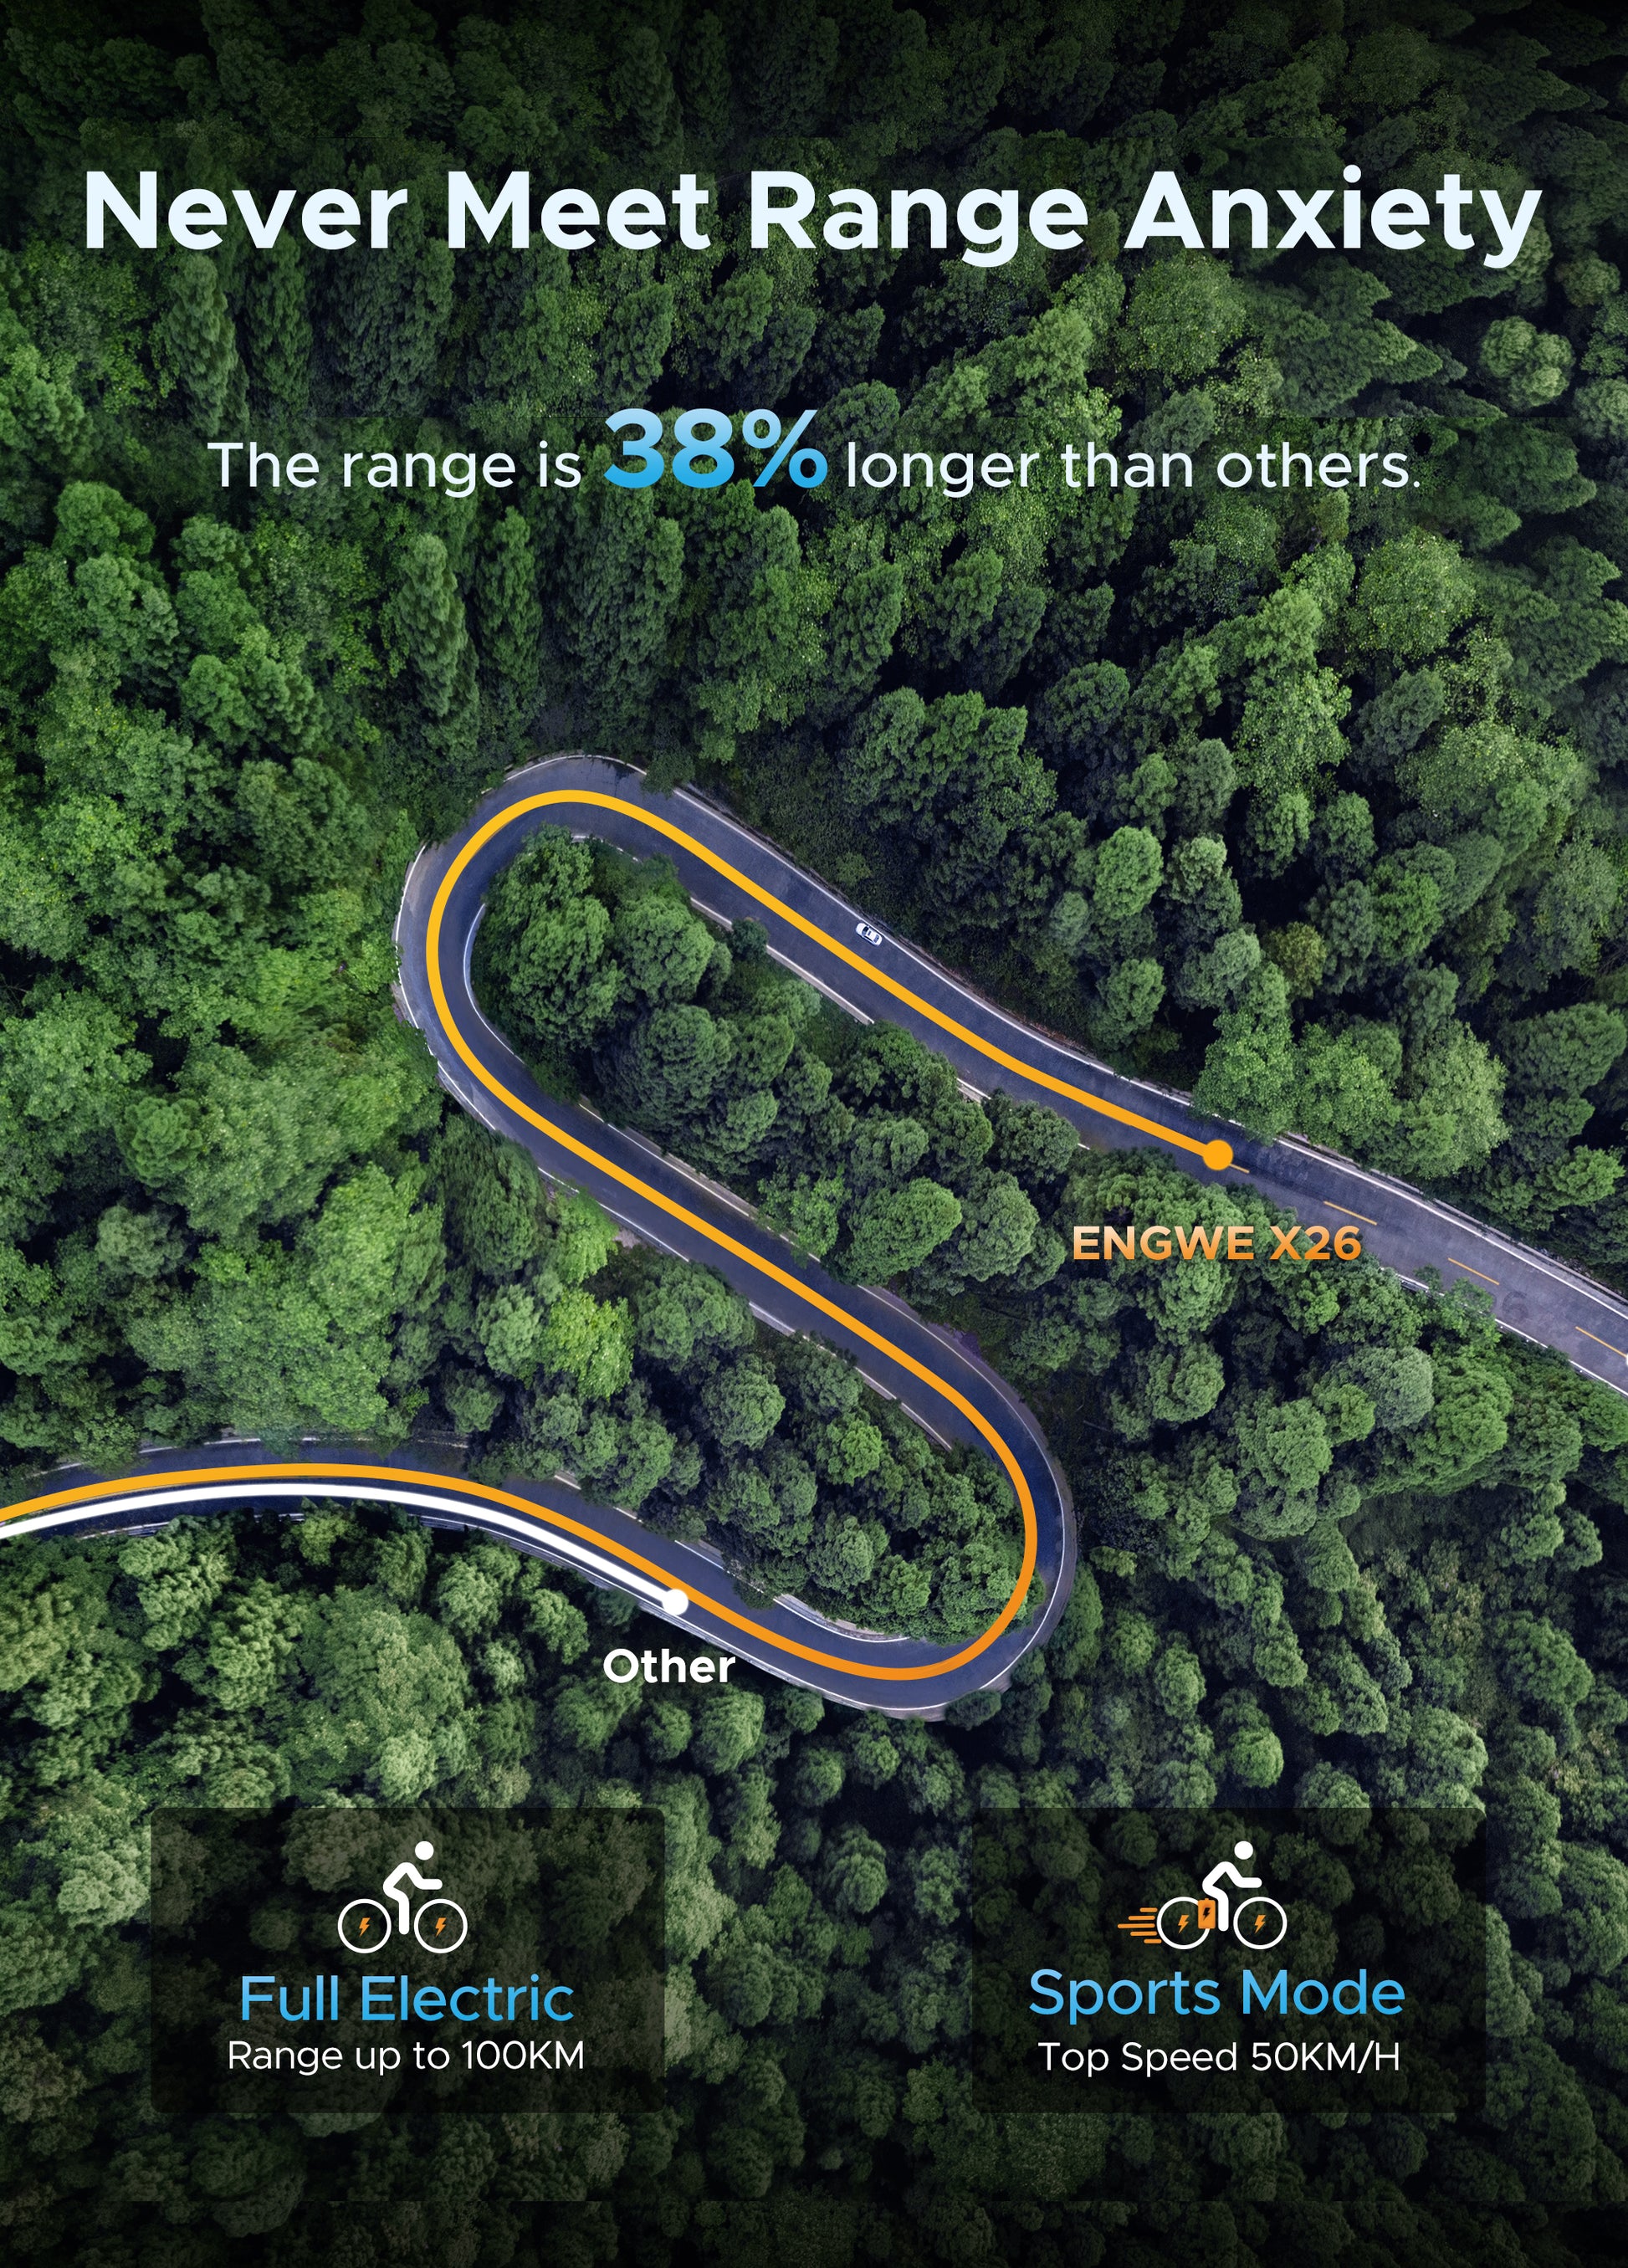 Aerial view of winding road with Engwe X26 ebike highlighted, promoting 38% longer range and no range anxiety.